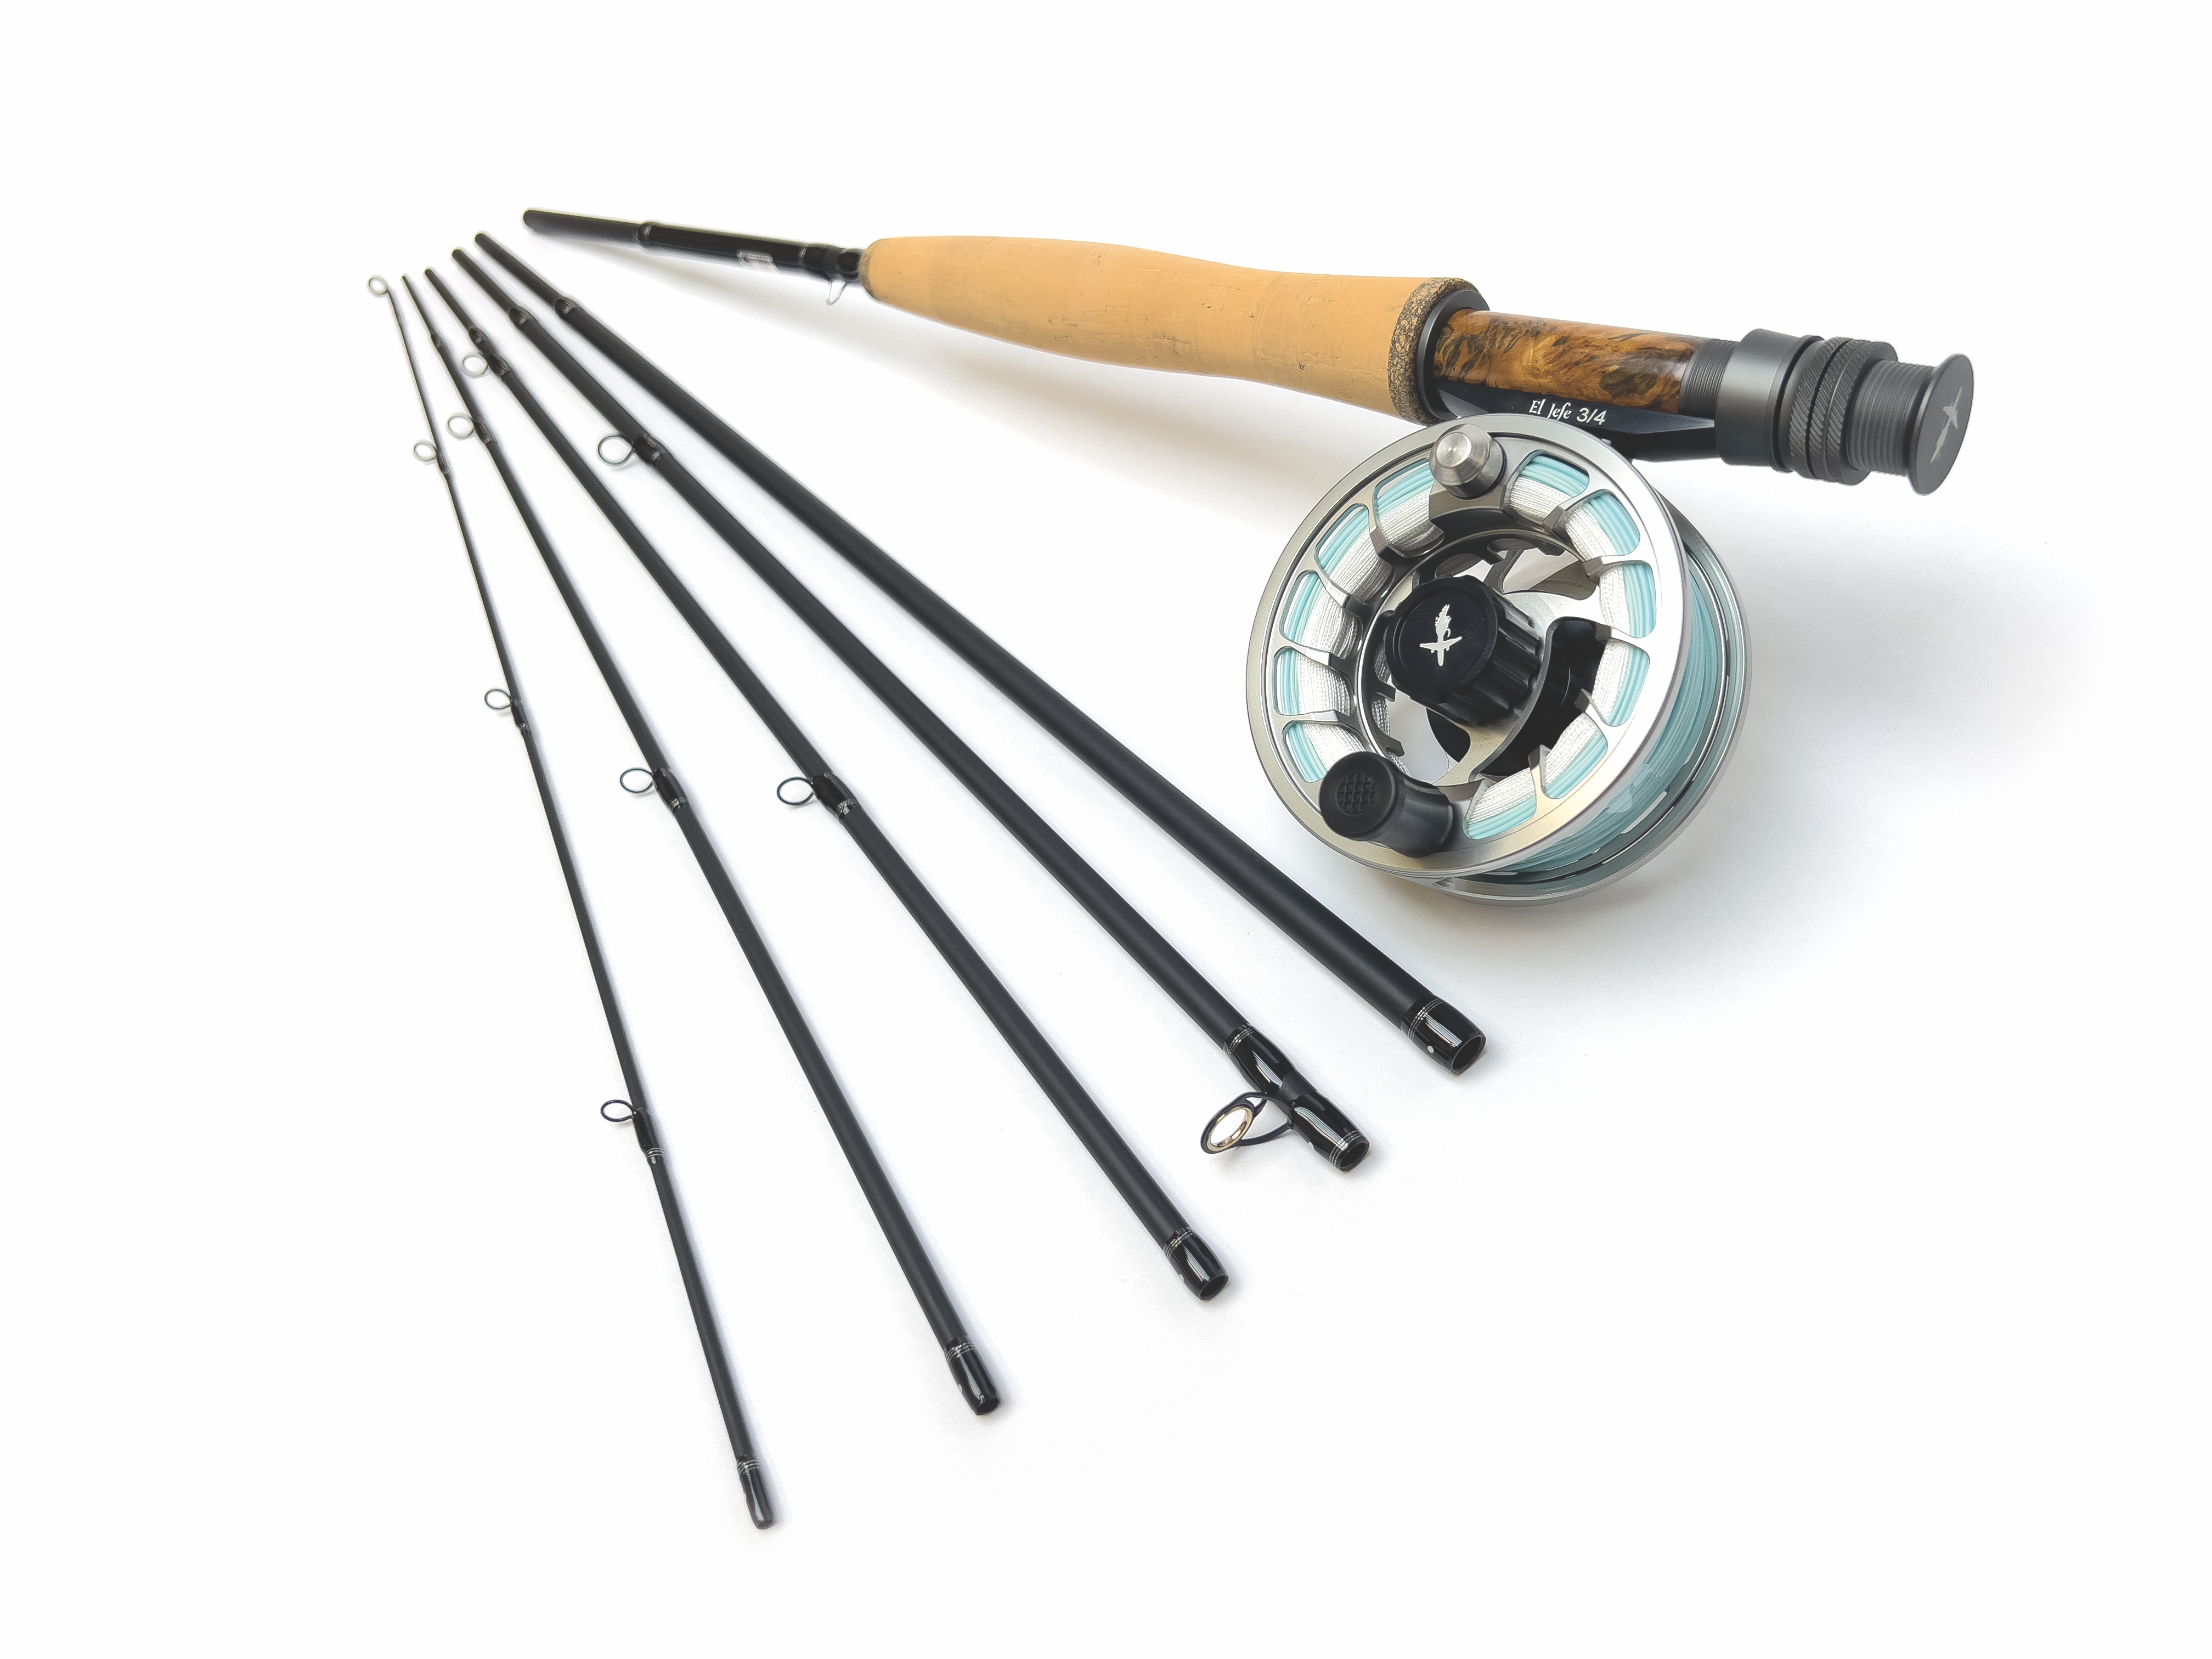 El Jefe Fly Fishing Combo Package | 766-3 | 7'6" Six Section 3 Weight Fly Rod And Reel Outfit